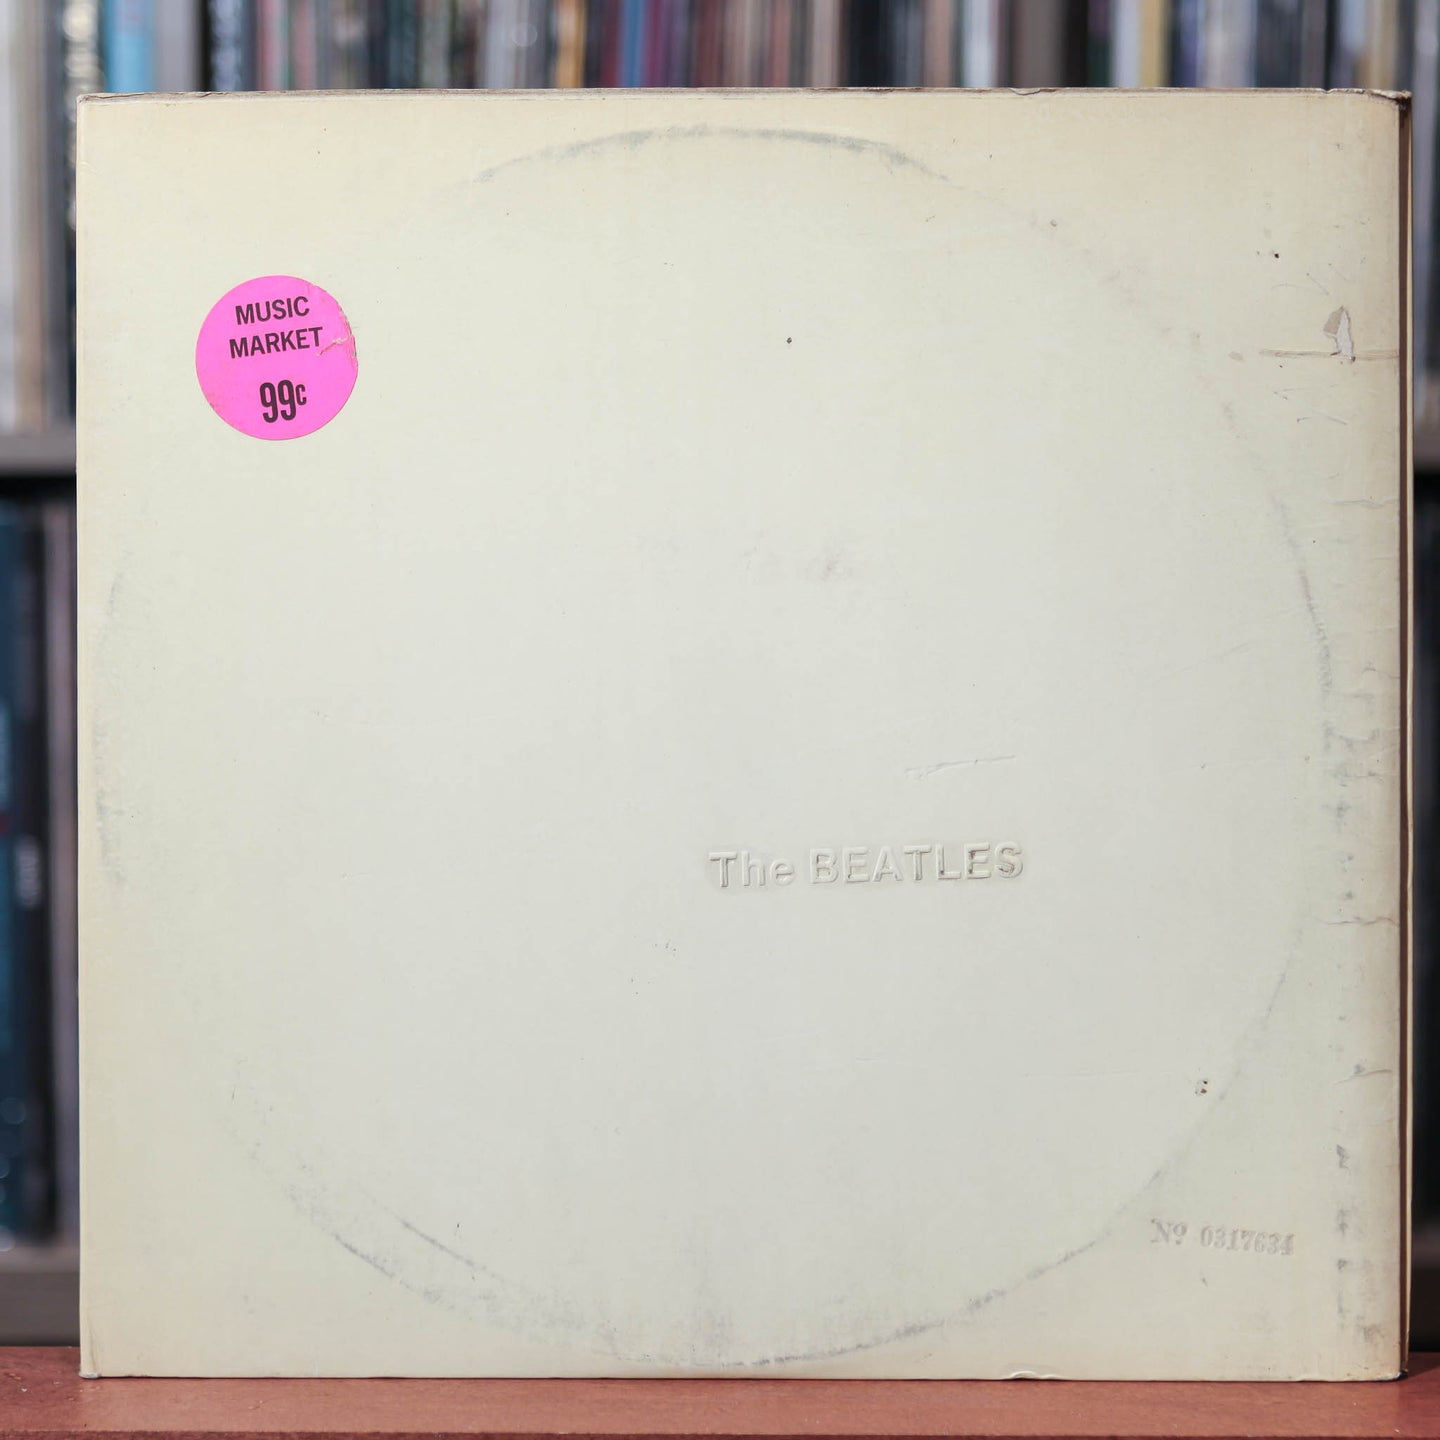 The Beatles - The Beatles (White Album) - 2LP - Numbered - Top Opening - UK Import - 1968 Apple